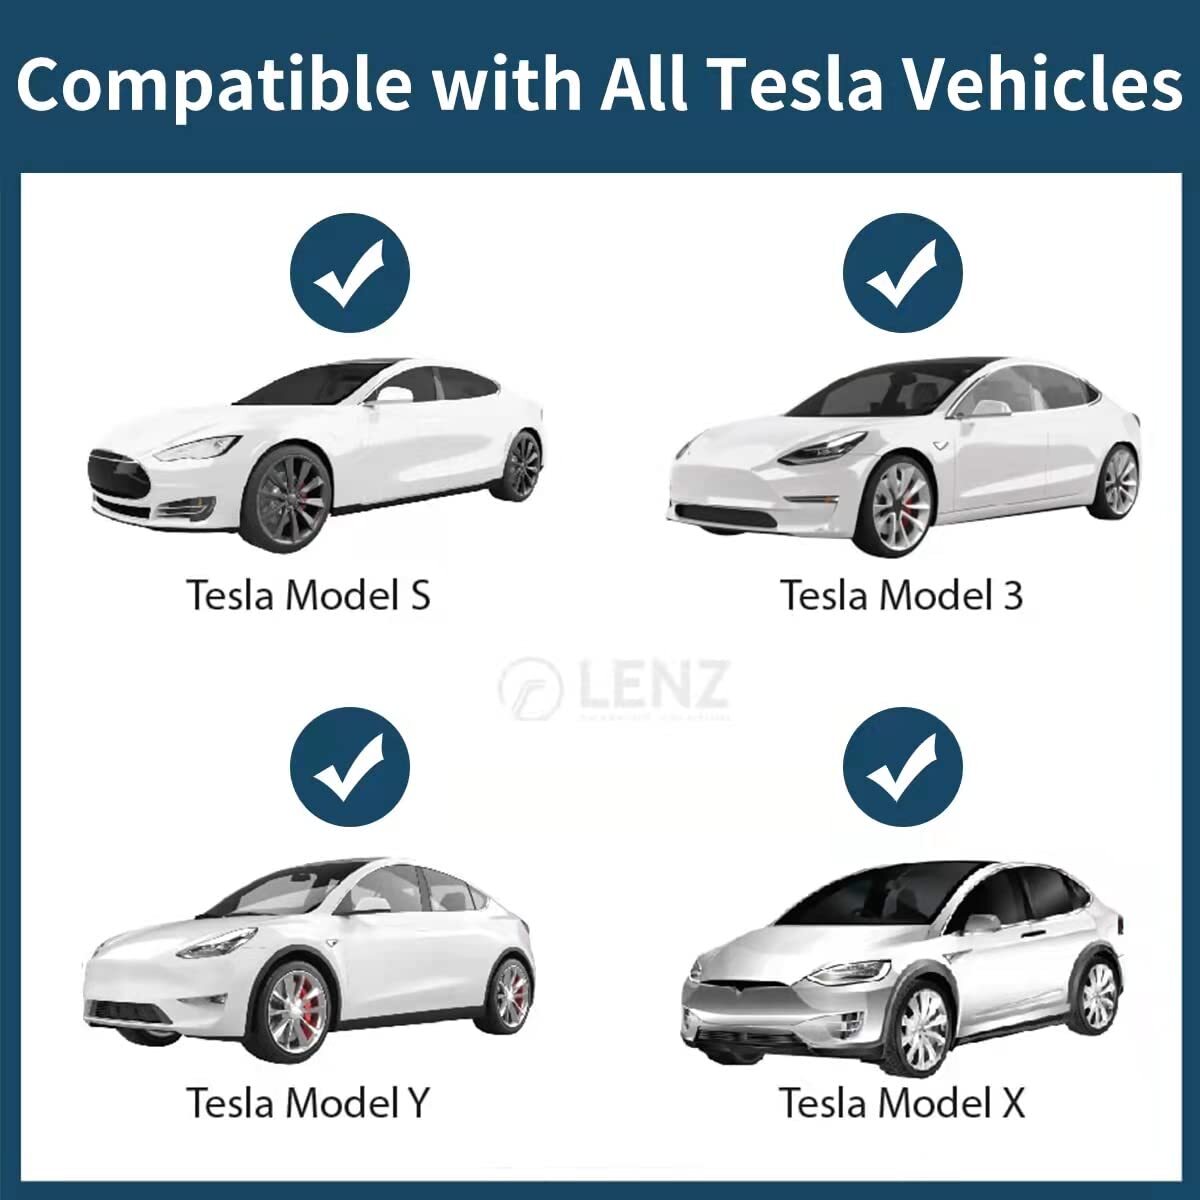 Four white Tesla Models (S, 3, Y, and X) showing compatibility